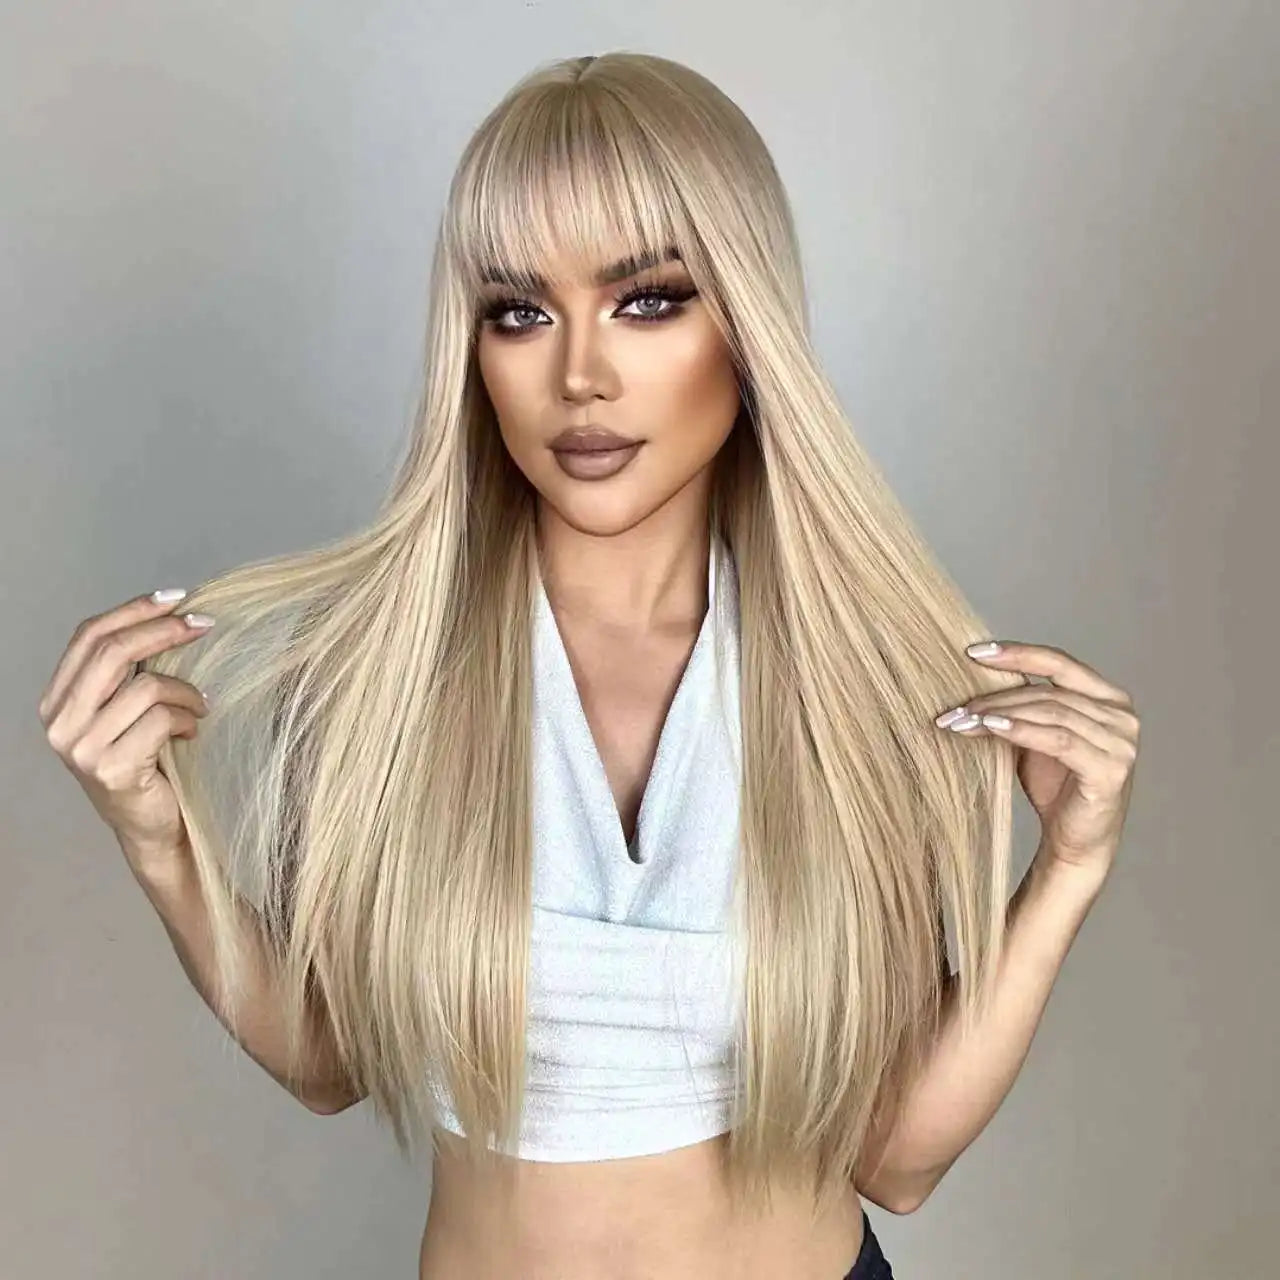 londe Golden Synthetic Wig - Crossdresser's Long Straight Wig with Bangs for Daily and Cosplay Glam, Heat Resistant Natural Hair Look